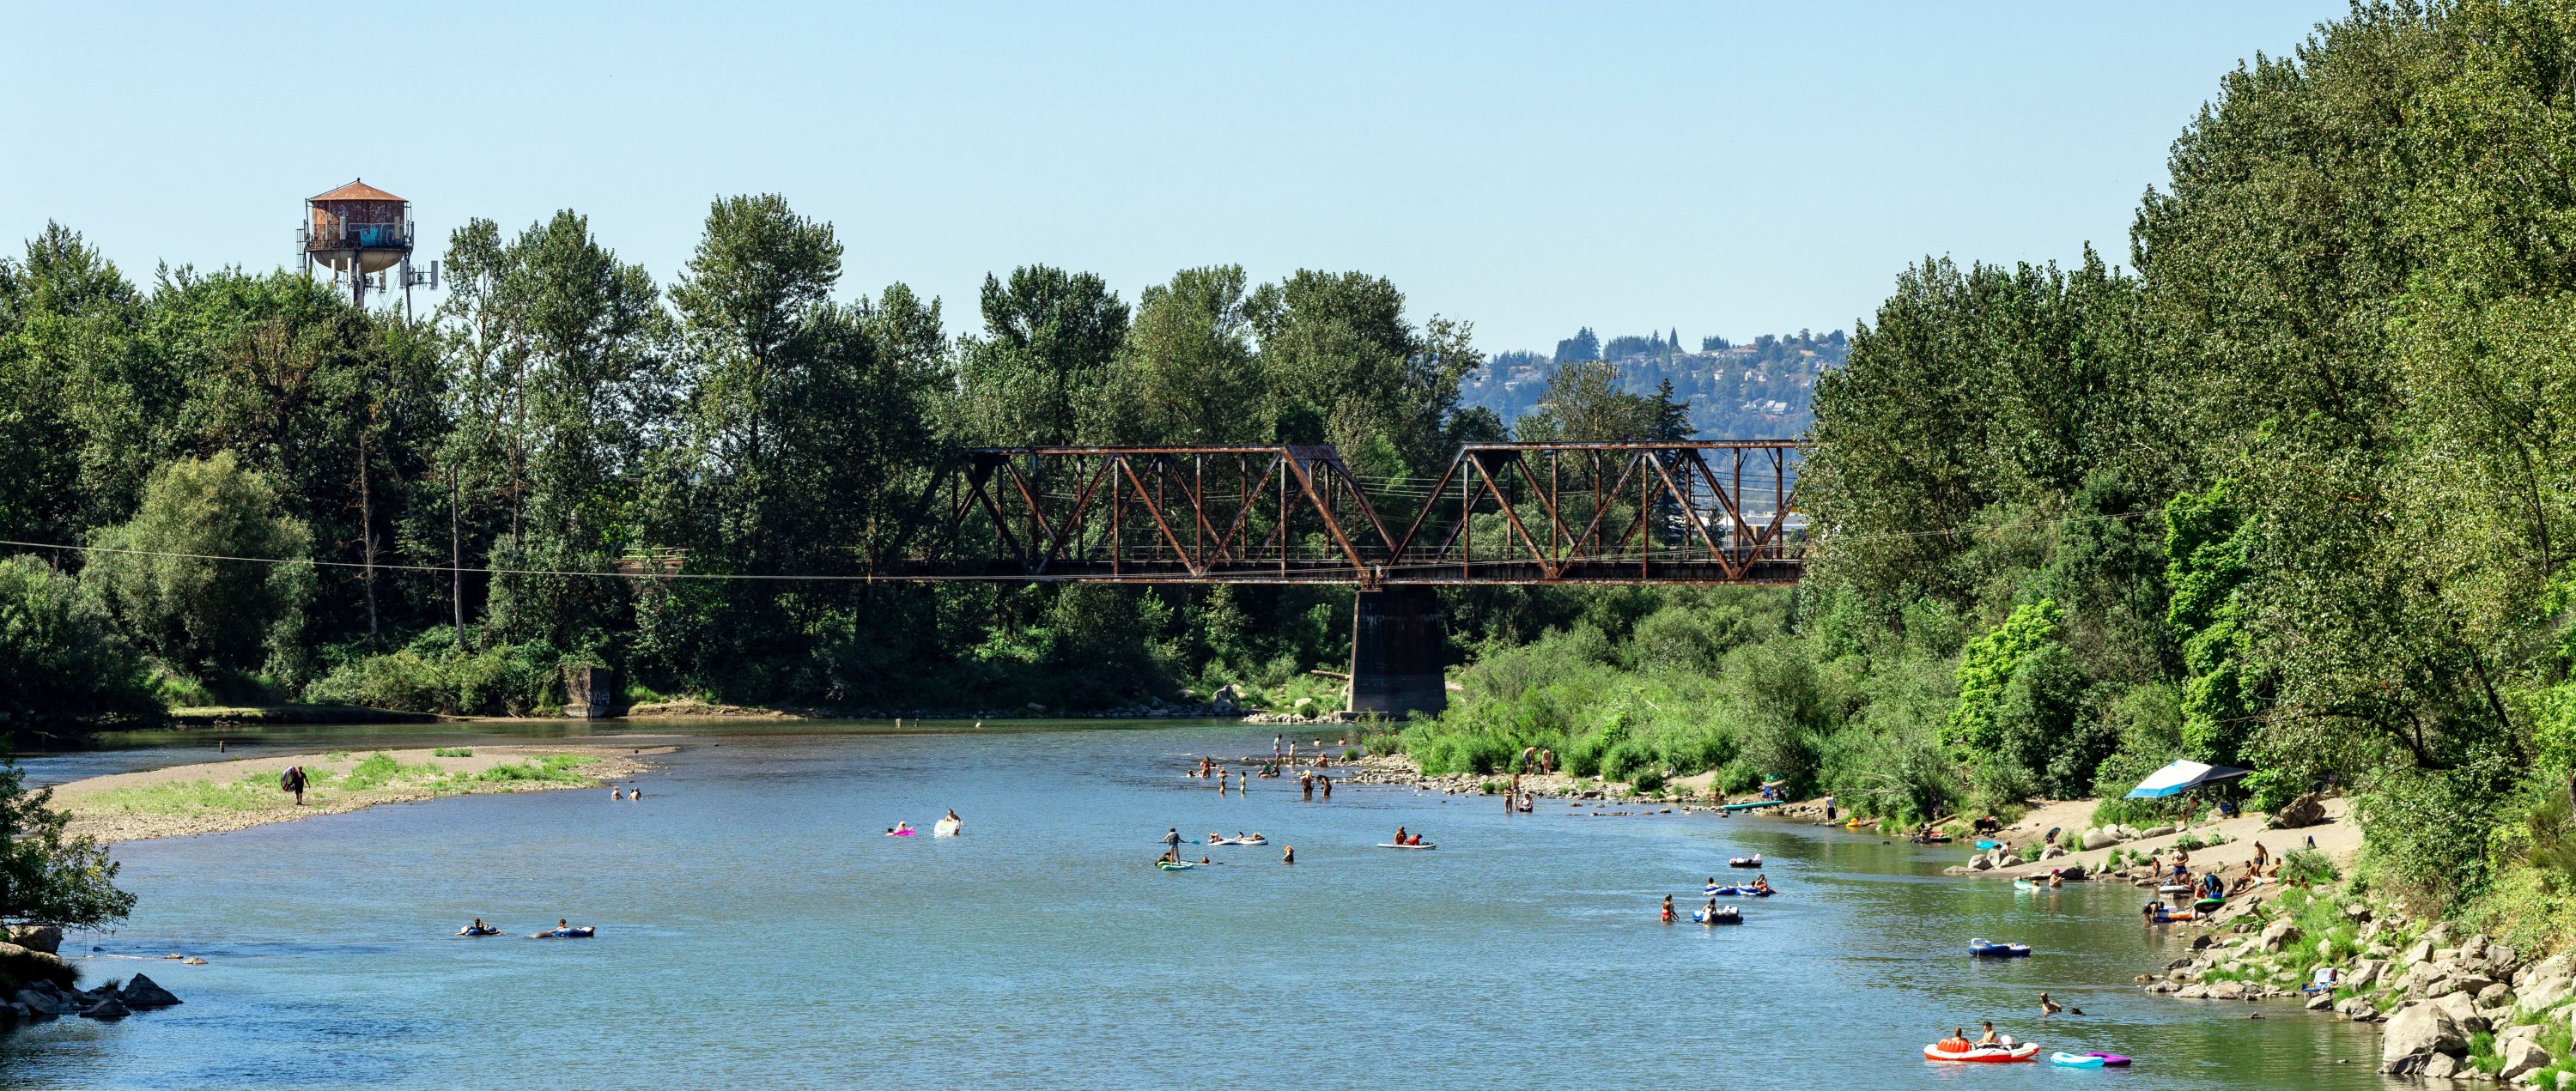 News and Media | The Confluence at Troutdale